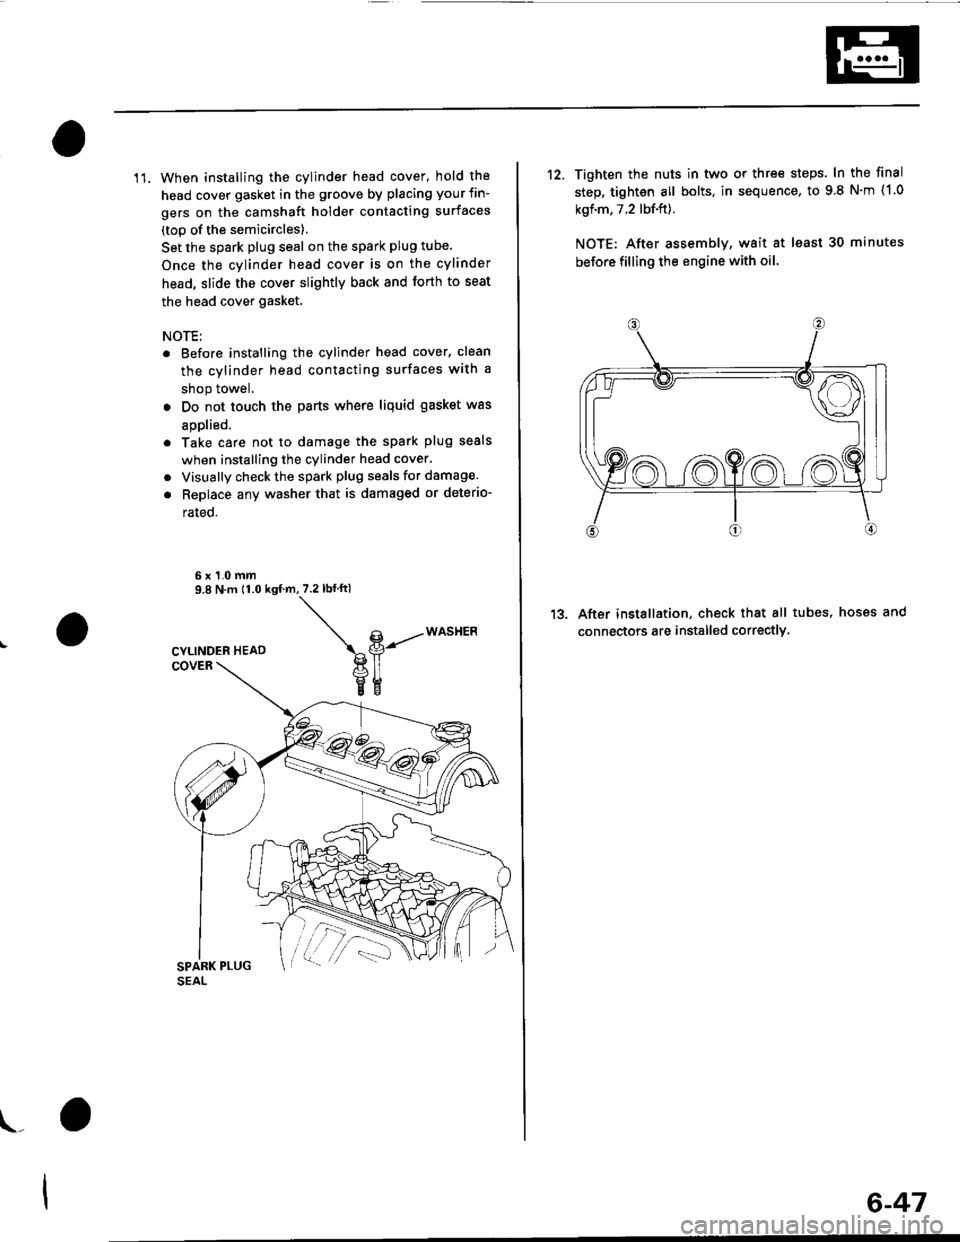 HONDA CIVIC 1997 6.G Workshop Manual 11. When installing the cylinder head cover, hold the
head cover gasket in the groove by placing your fin-
gers on the camshaft holder contacting surfaces
(top of the semicircles)
Set the spark plug s